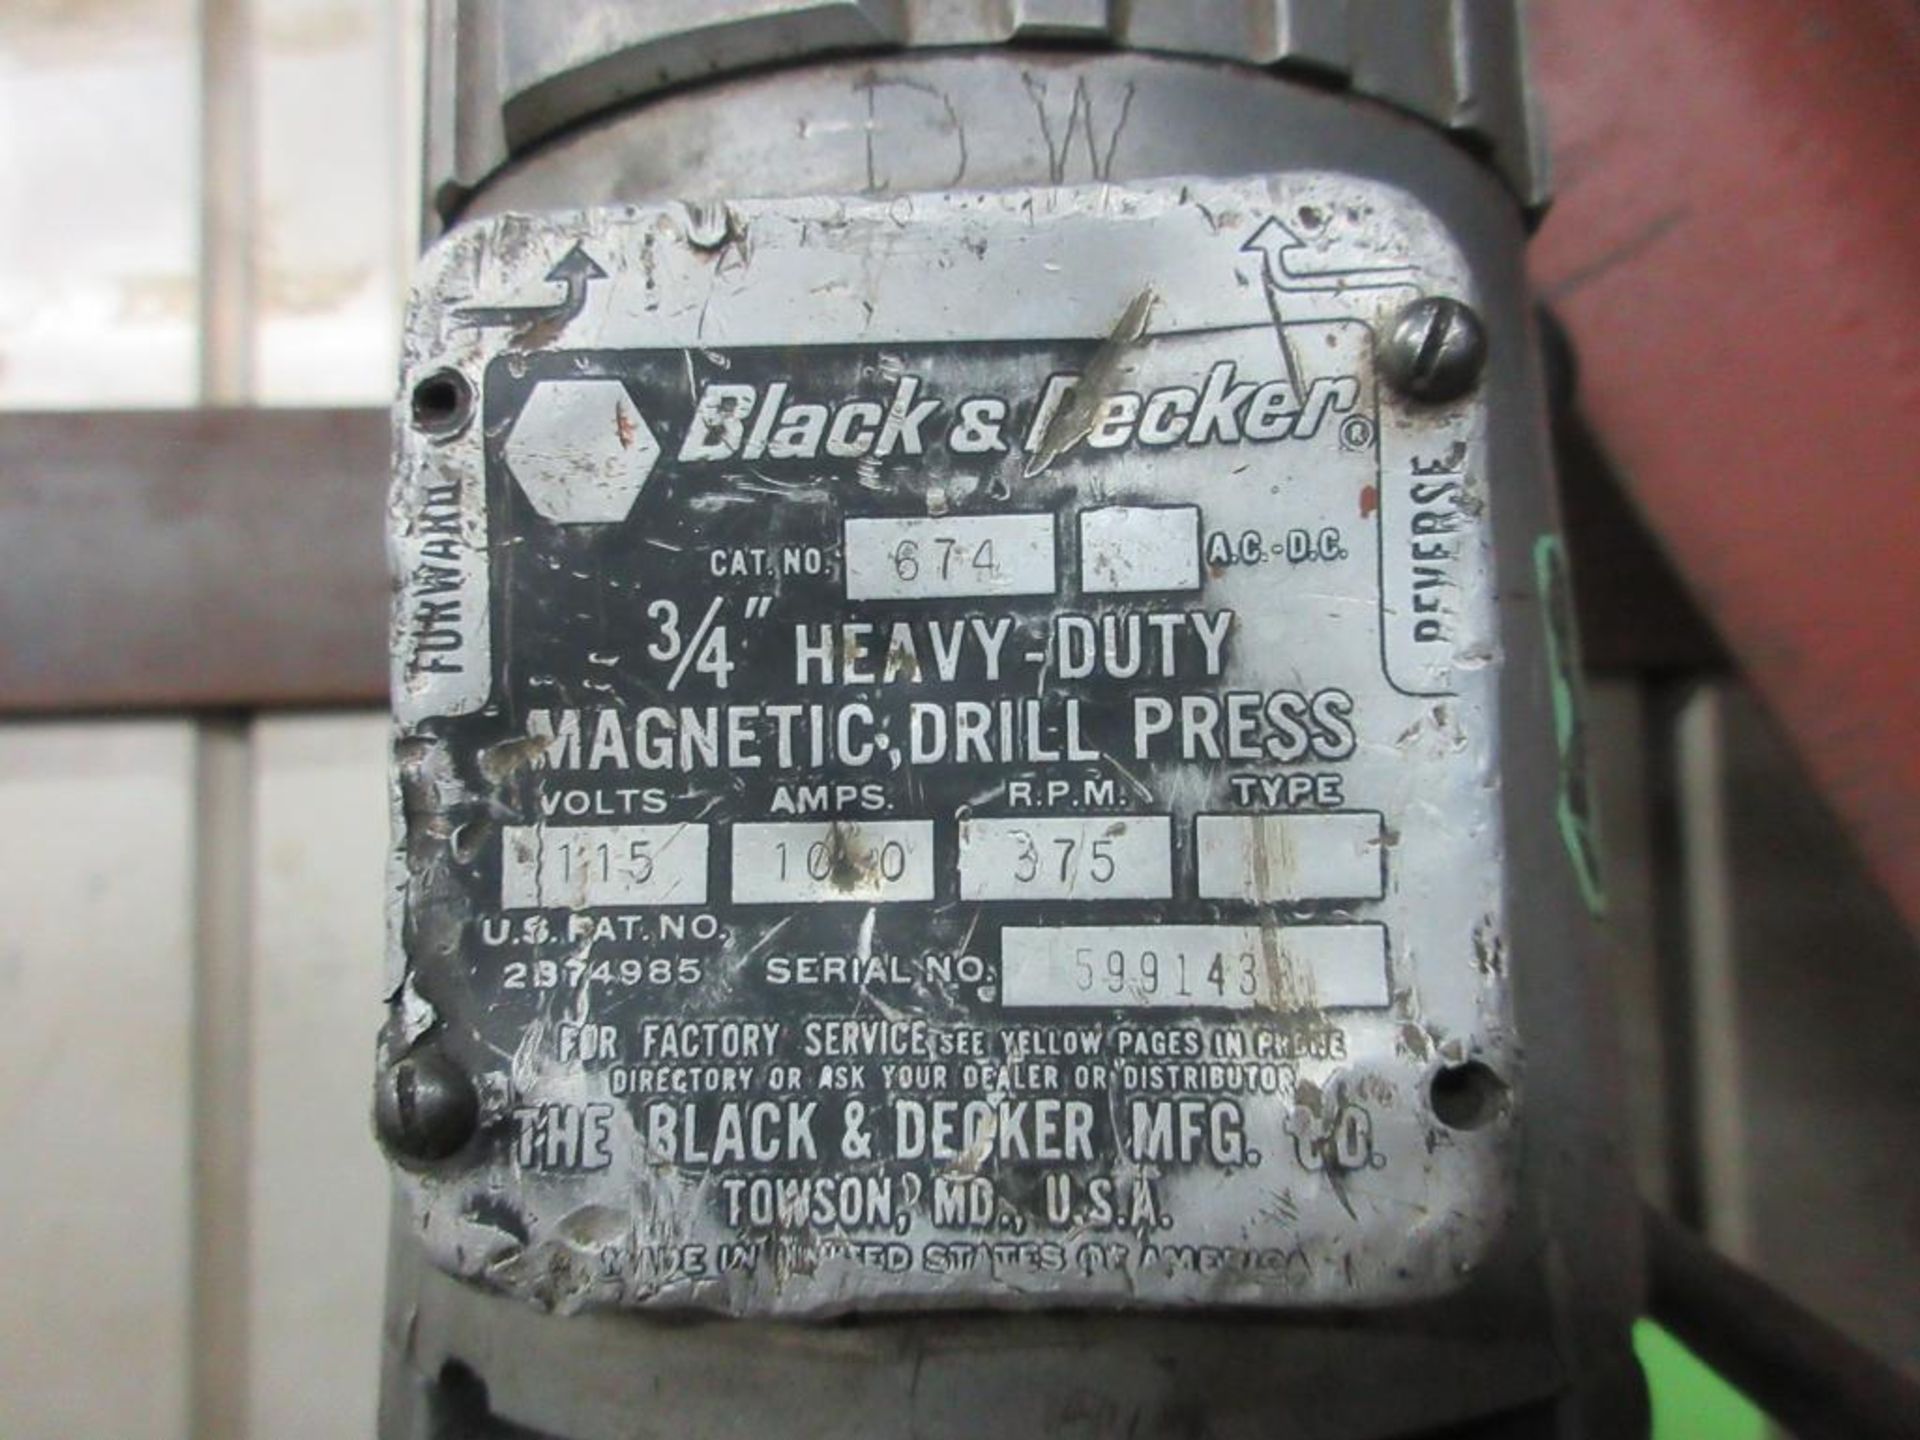 BLACK AND DECKER 3/4" HEAVY DUTY MAGNETIC DRILL PRESS MODEL 674 (IN CENTRAL TOOL CRIB) - Image 3 of 3